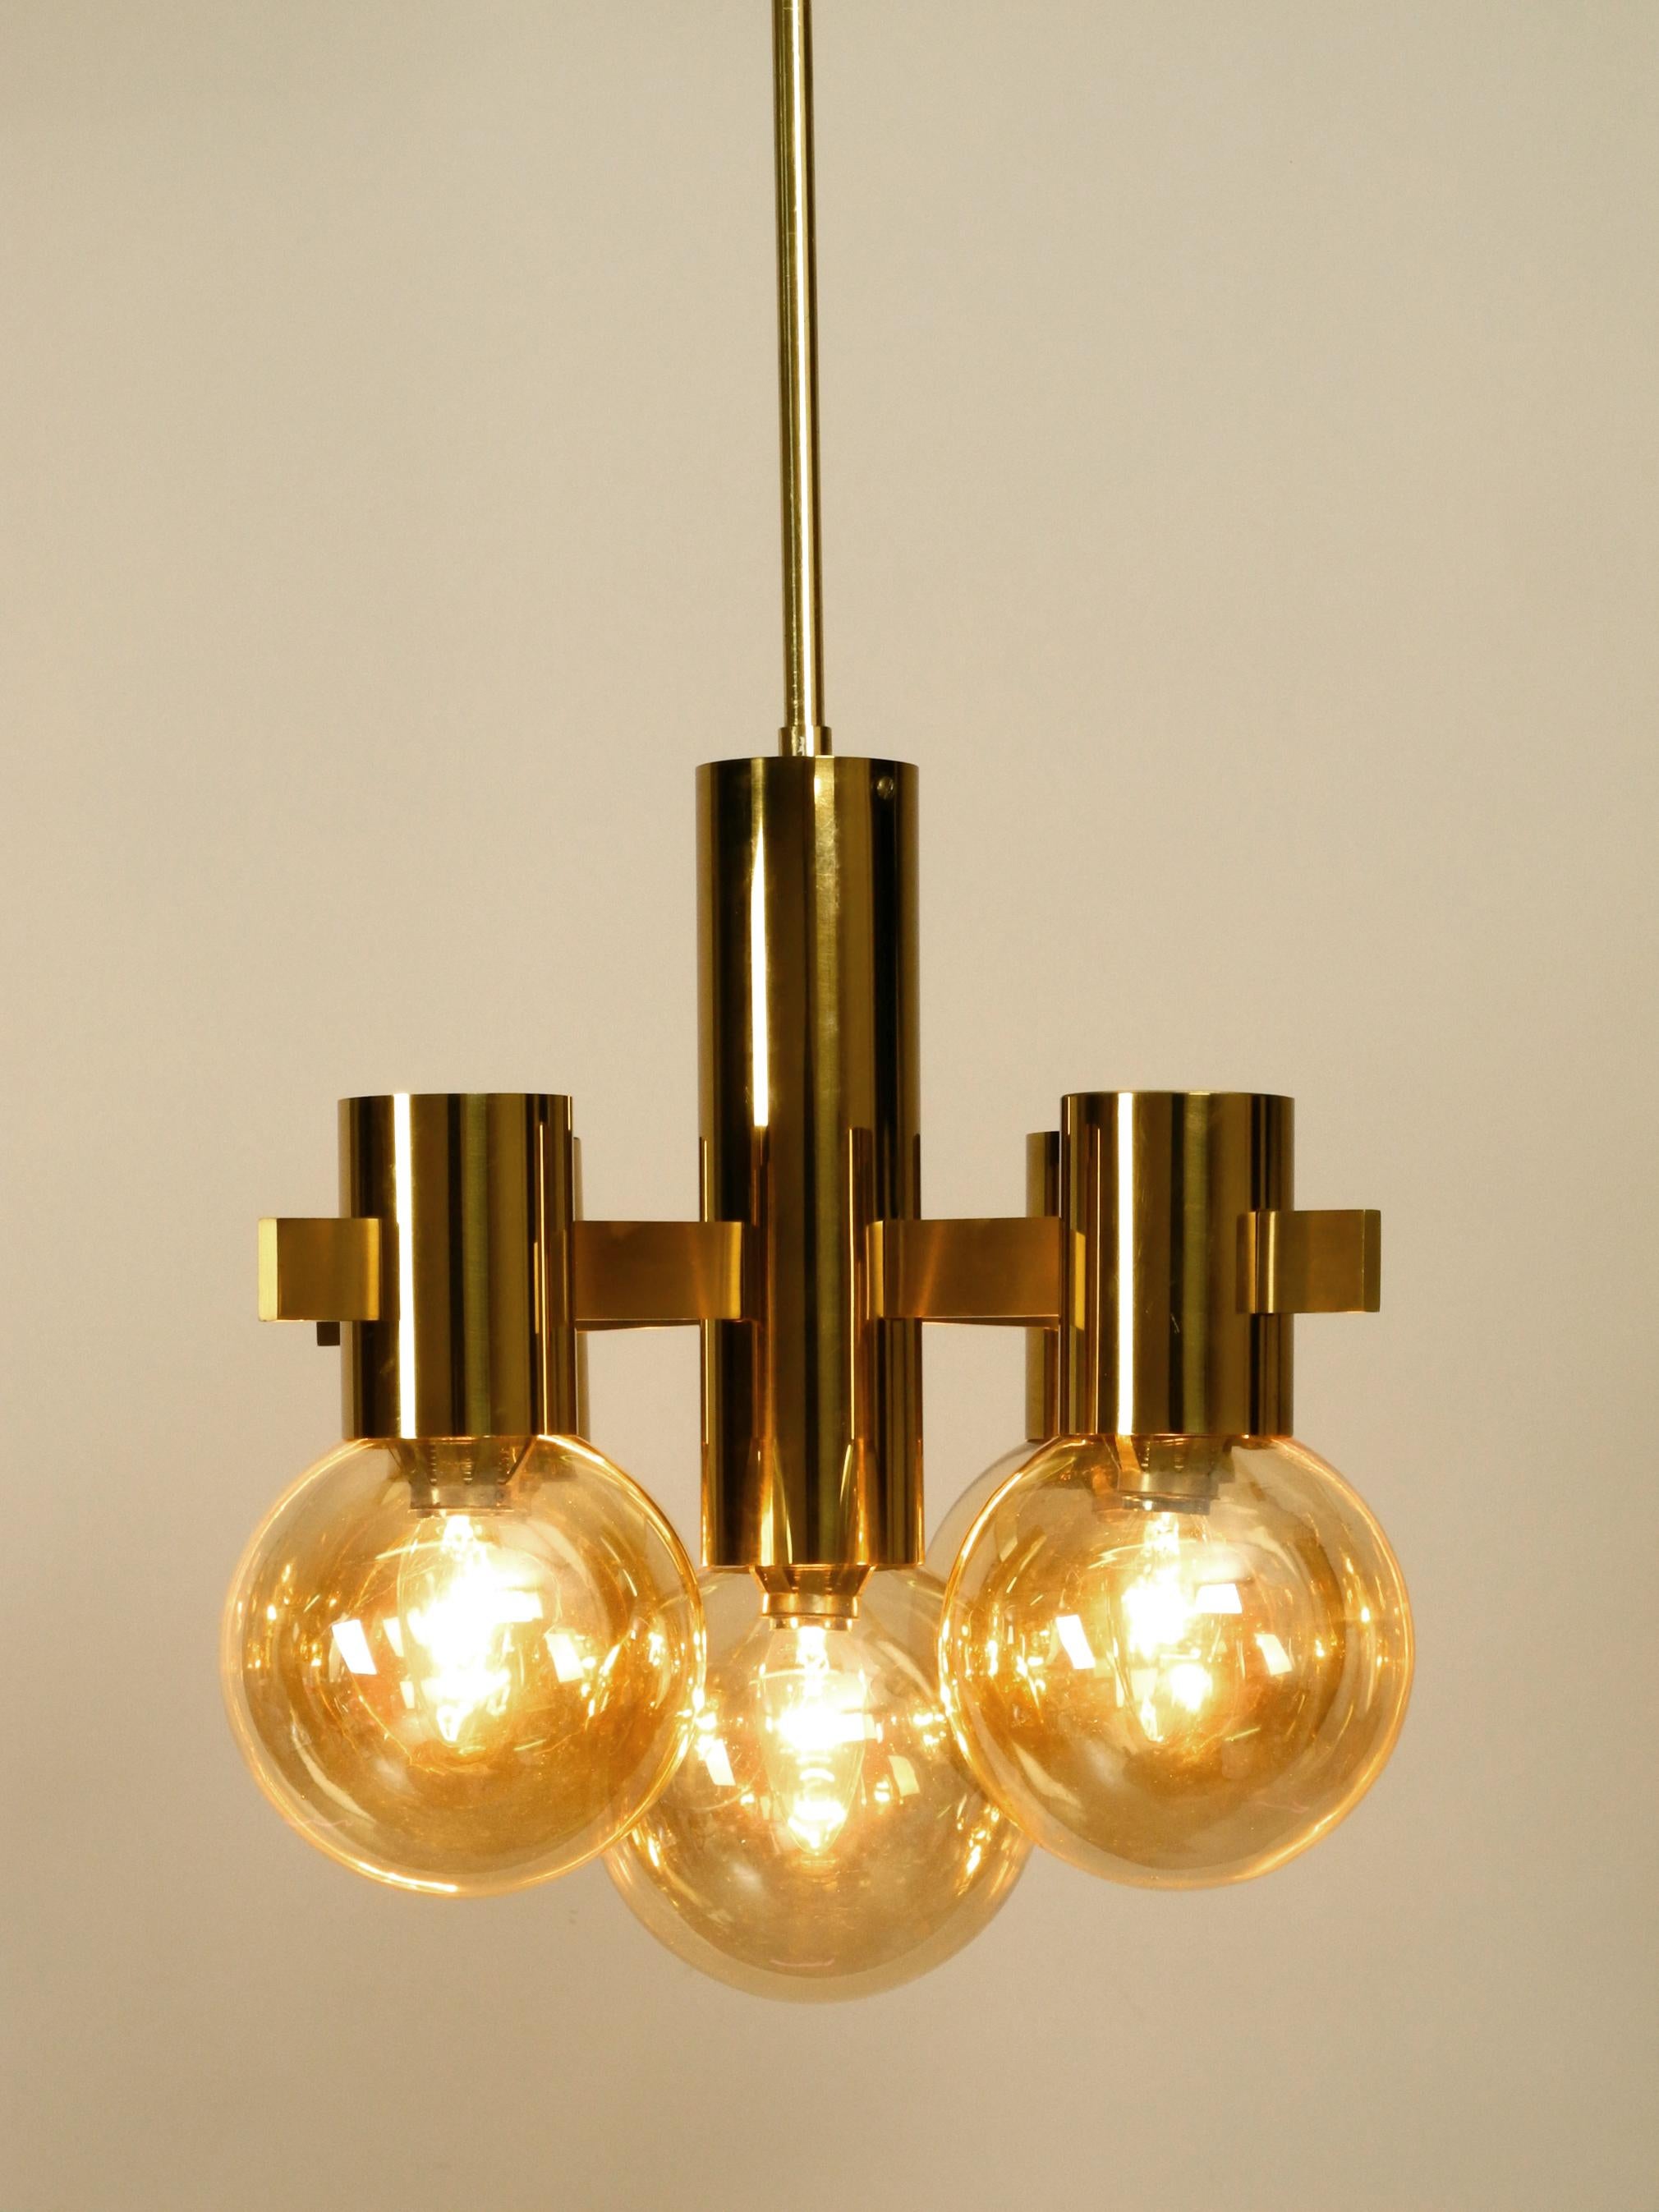 Beautiful 1960s Brass Ceiling Lamp by Hans Agne Jakobsson with 5 Glass Balls 3